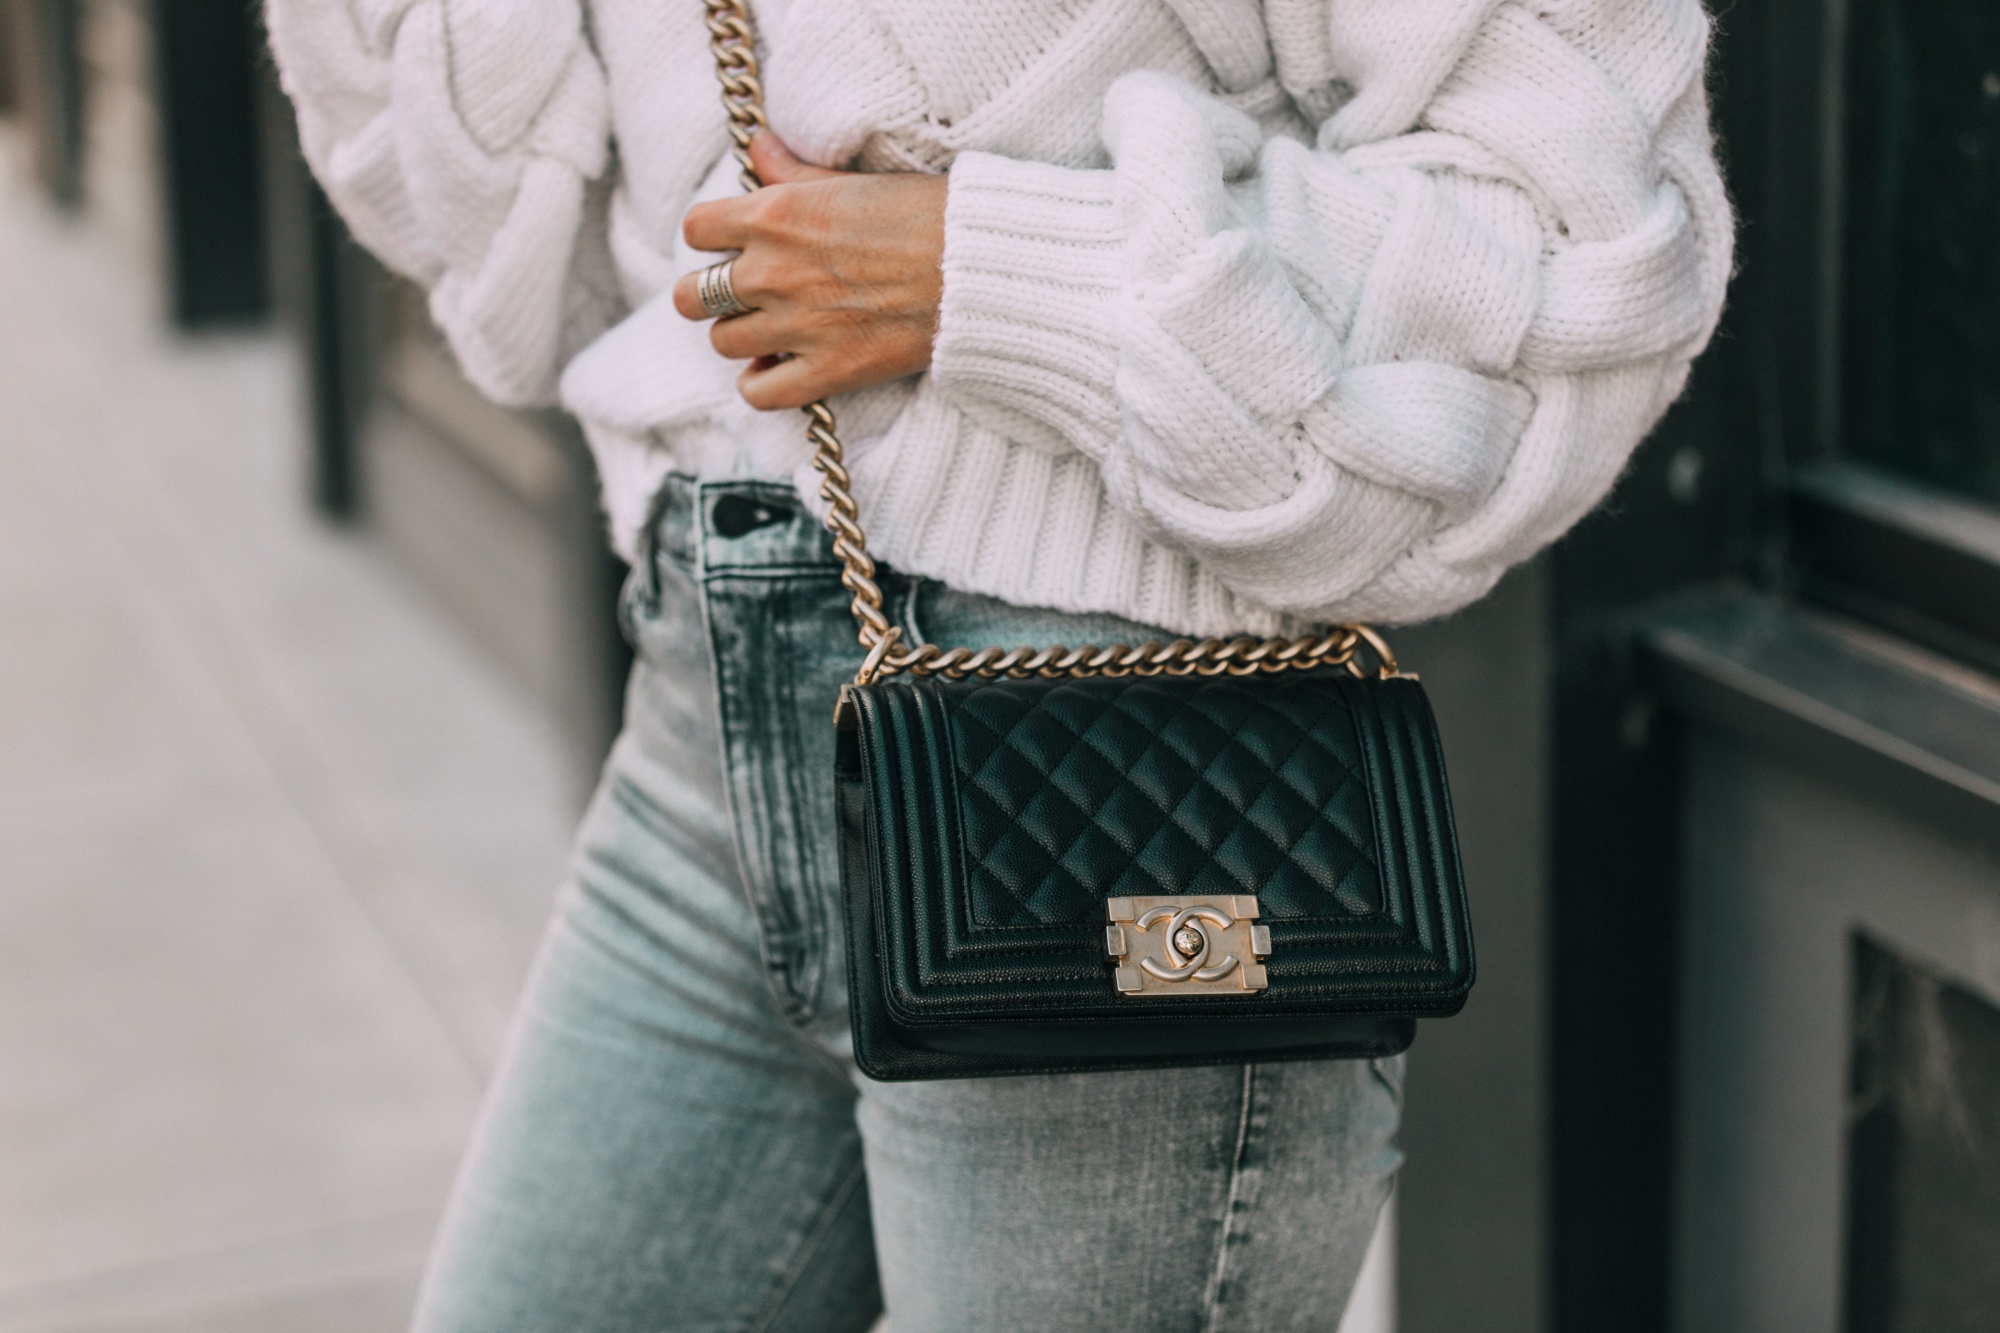 classic handbags all women should own, must-have handbag styles, black leather quilted Chanel crossbody handbag